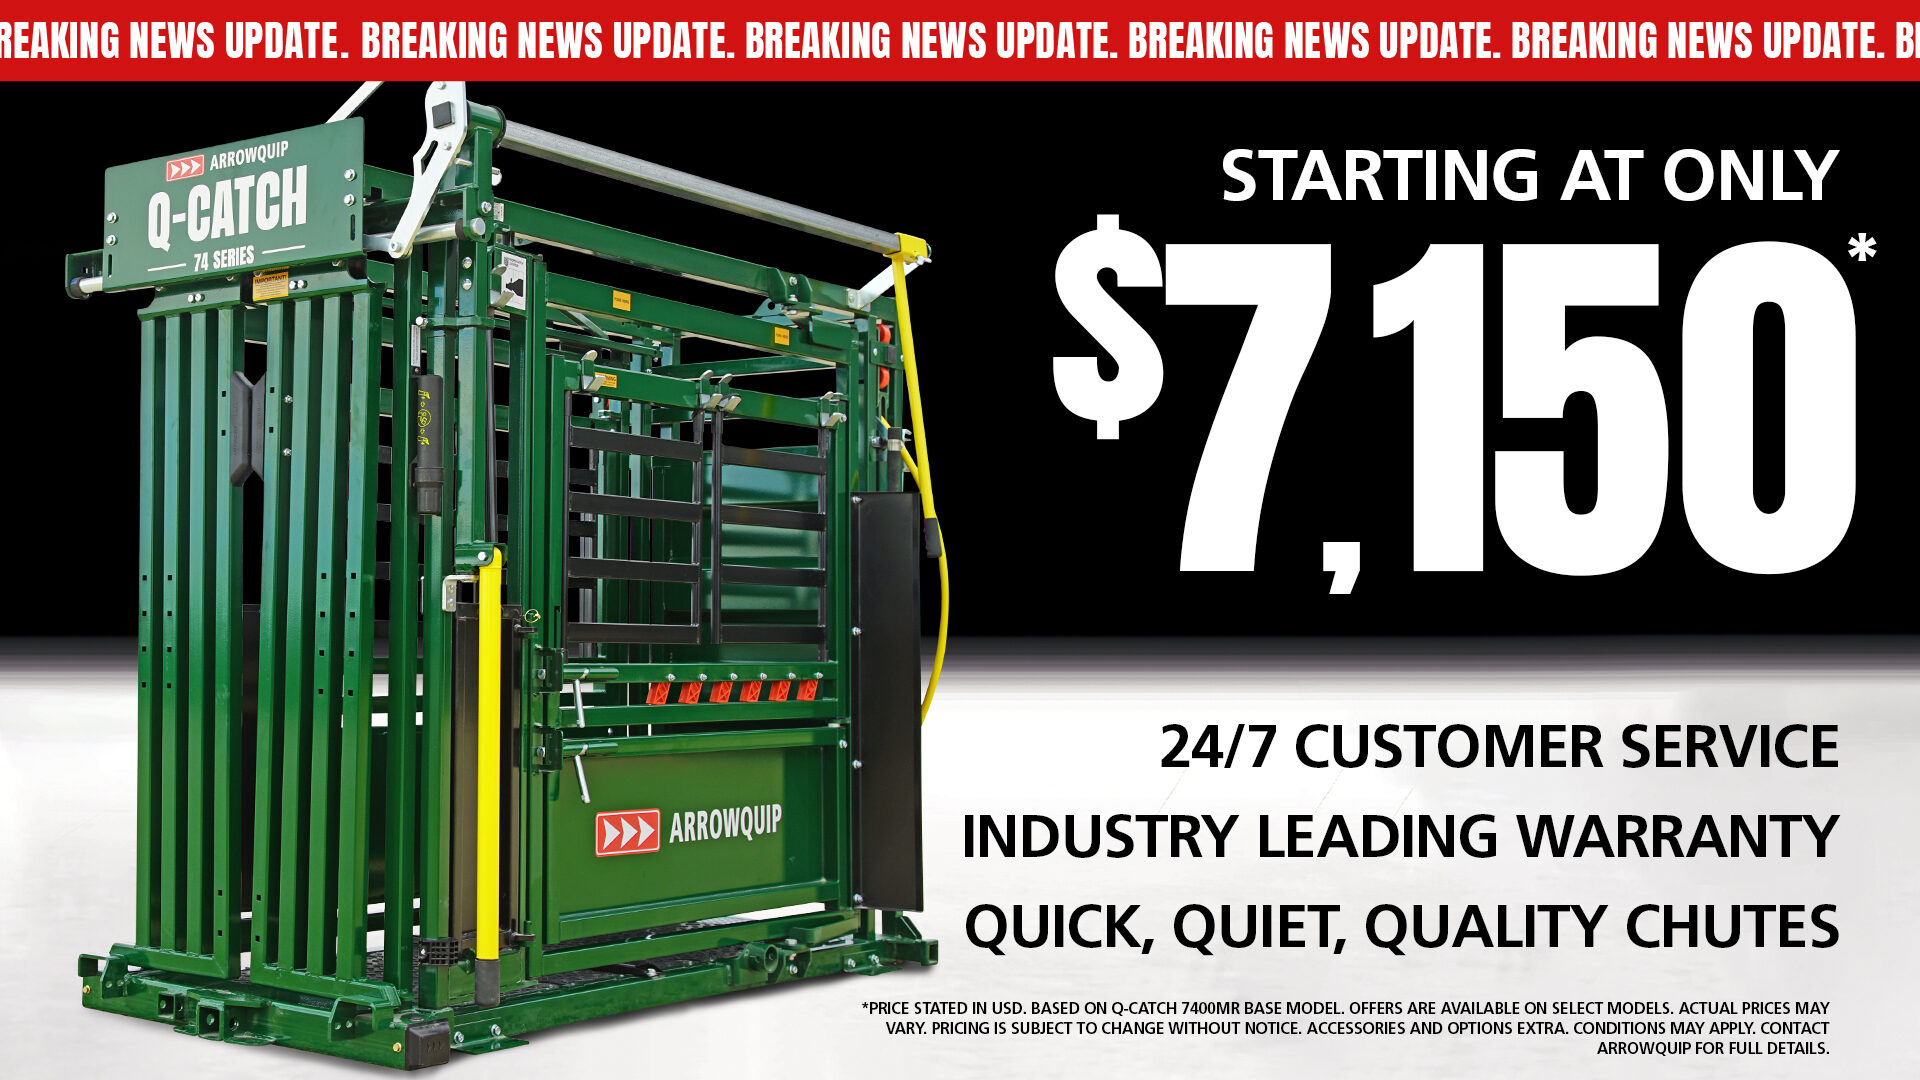 Q-Catch Series squeeze chute limited time price starting at $7,150 USD main image